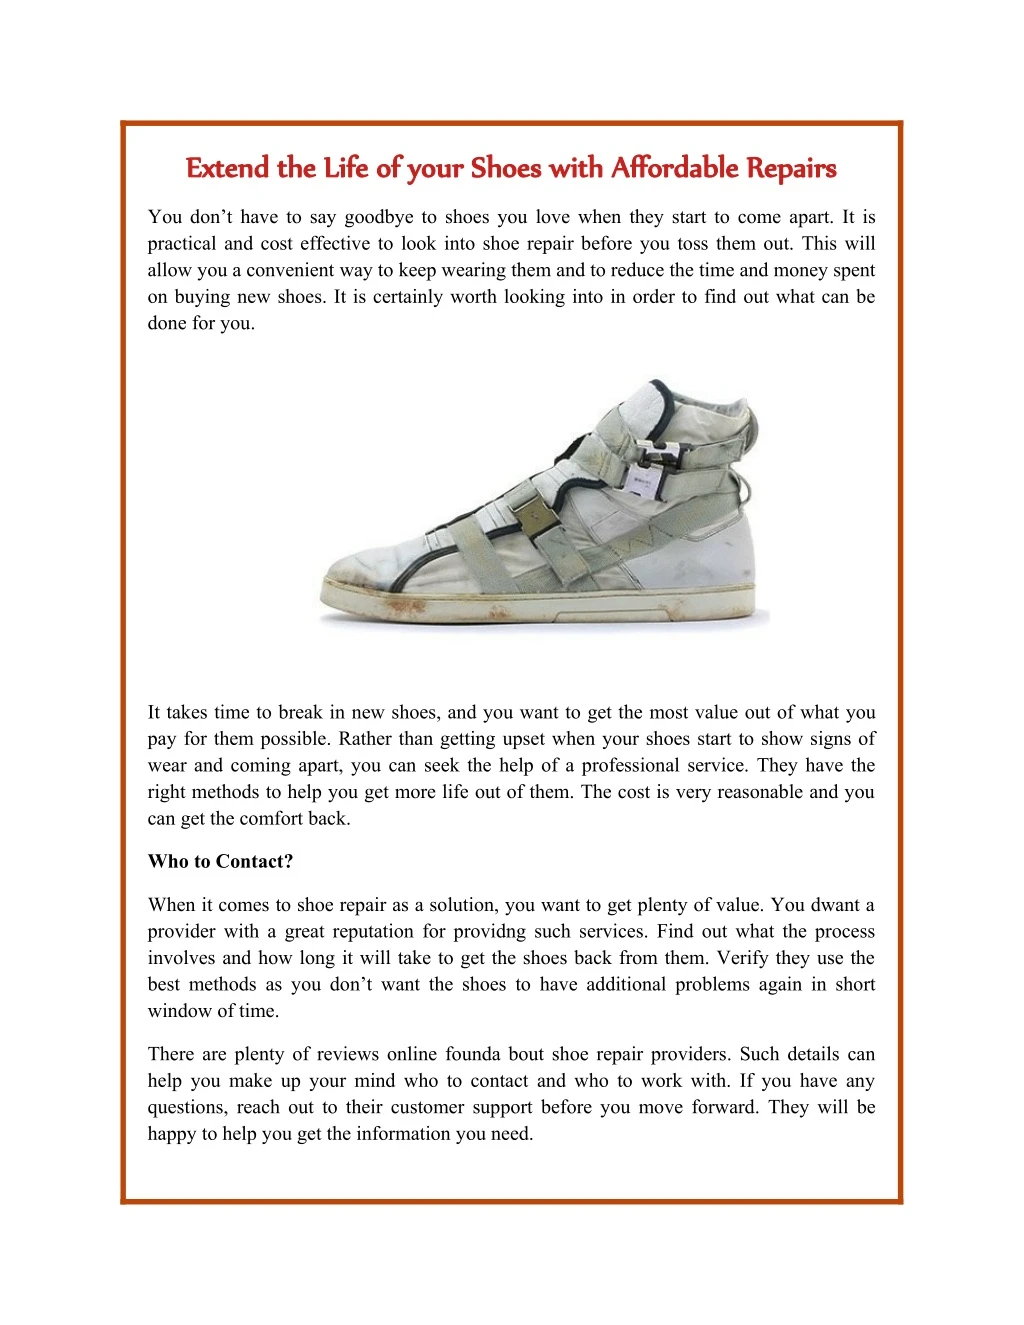 extend the life of your shoes with affordable